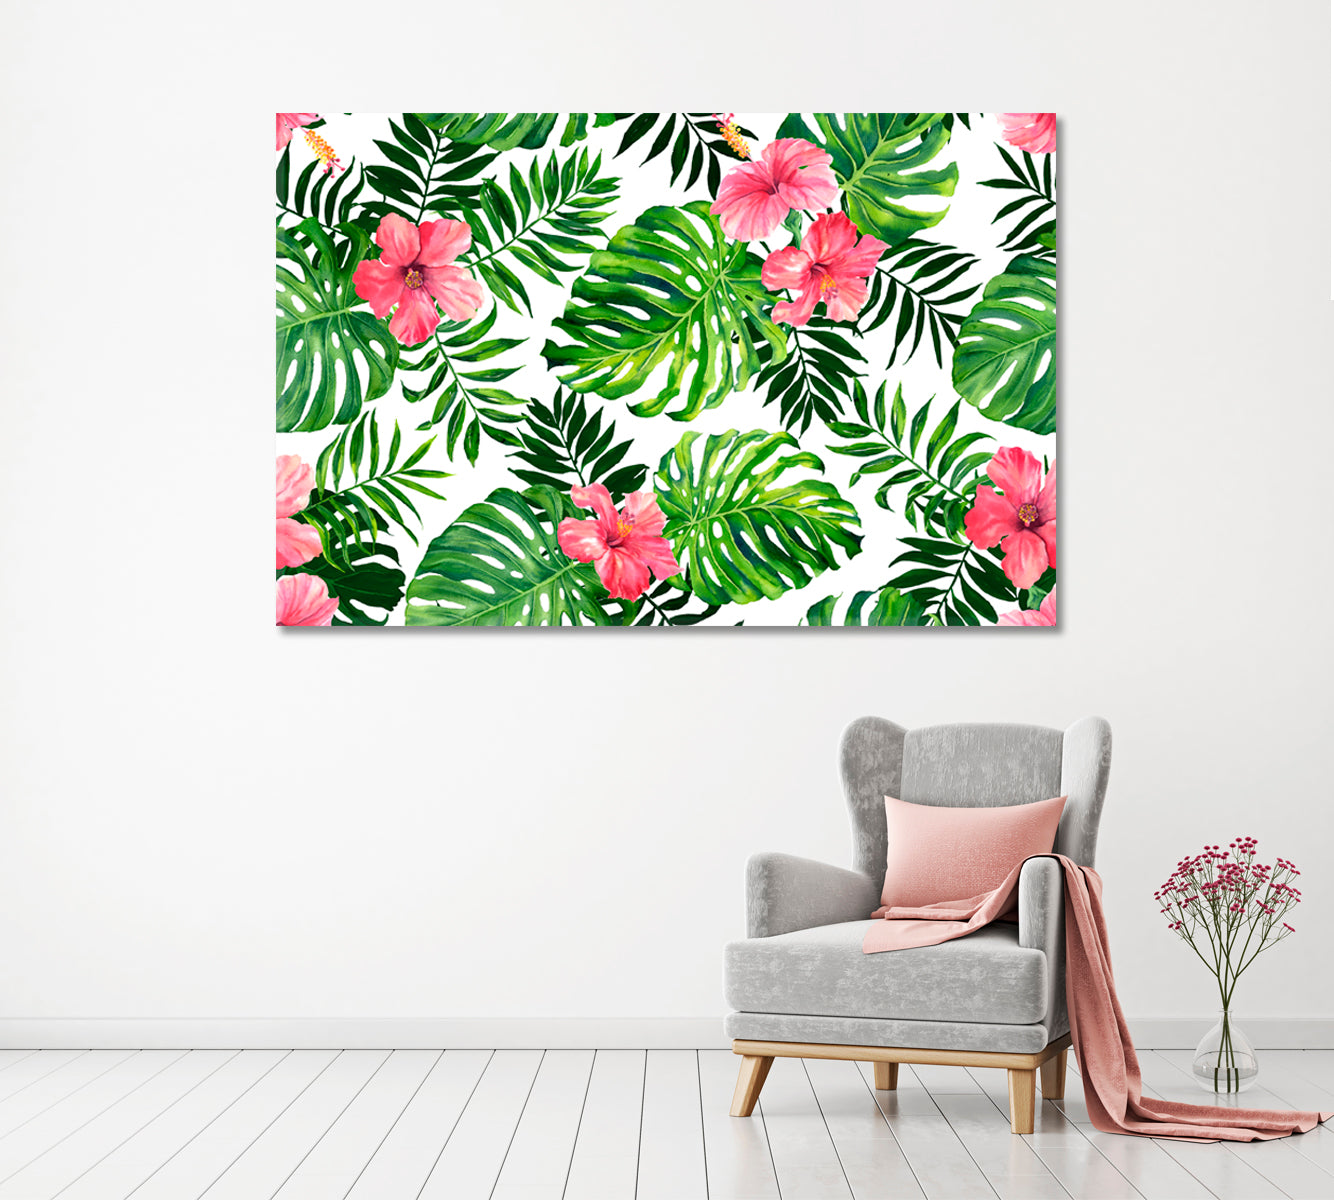 Hibiscus Flowers with Tropical Leaves Canvas Print ArtLexy 1 Panel 24"x16" inches 